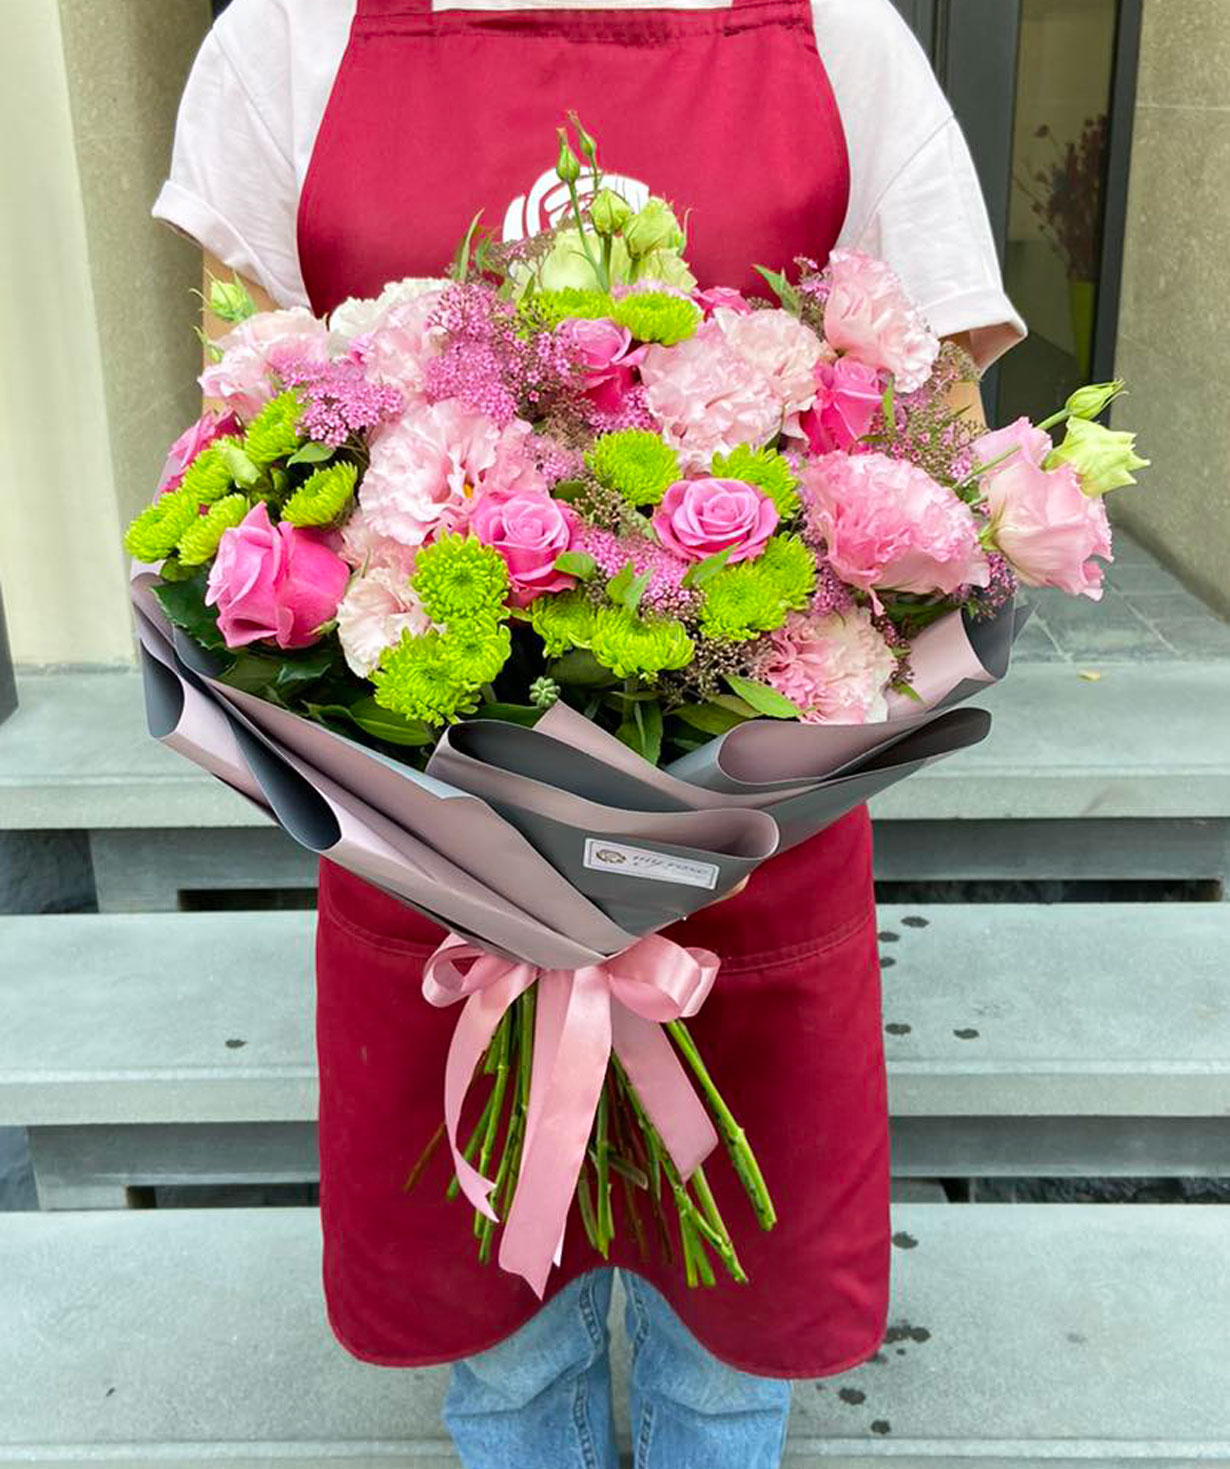 Bouquet `Salerno` with roses and lisianthus